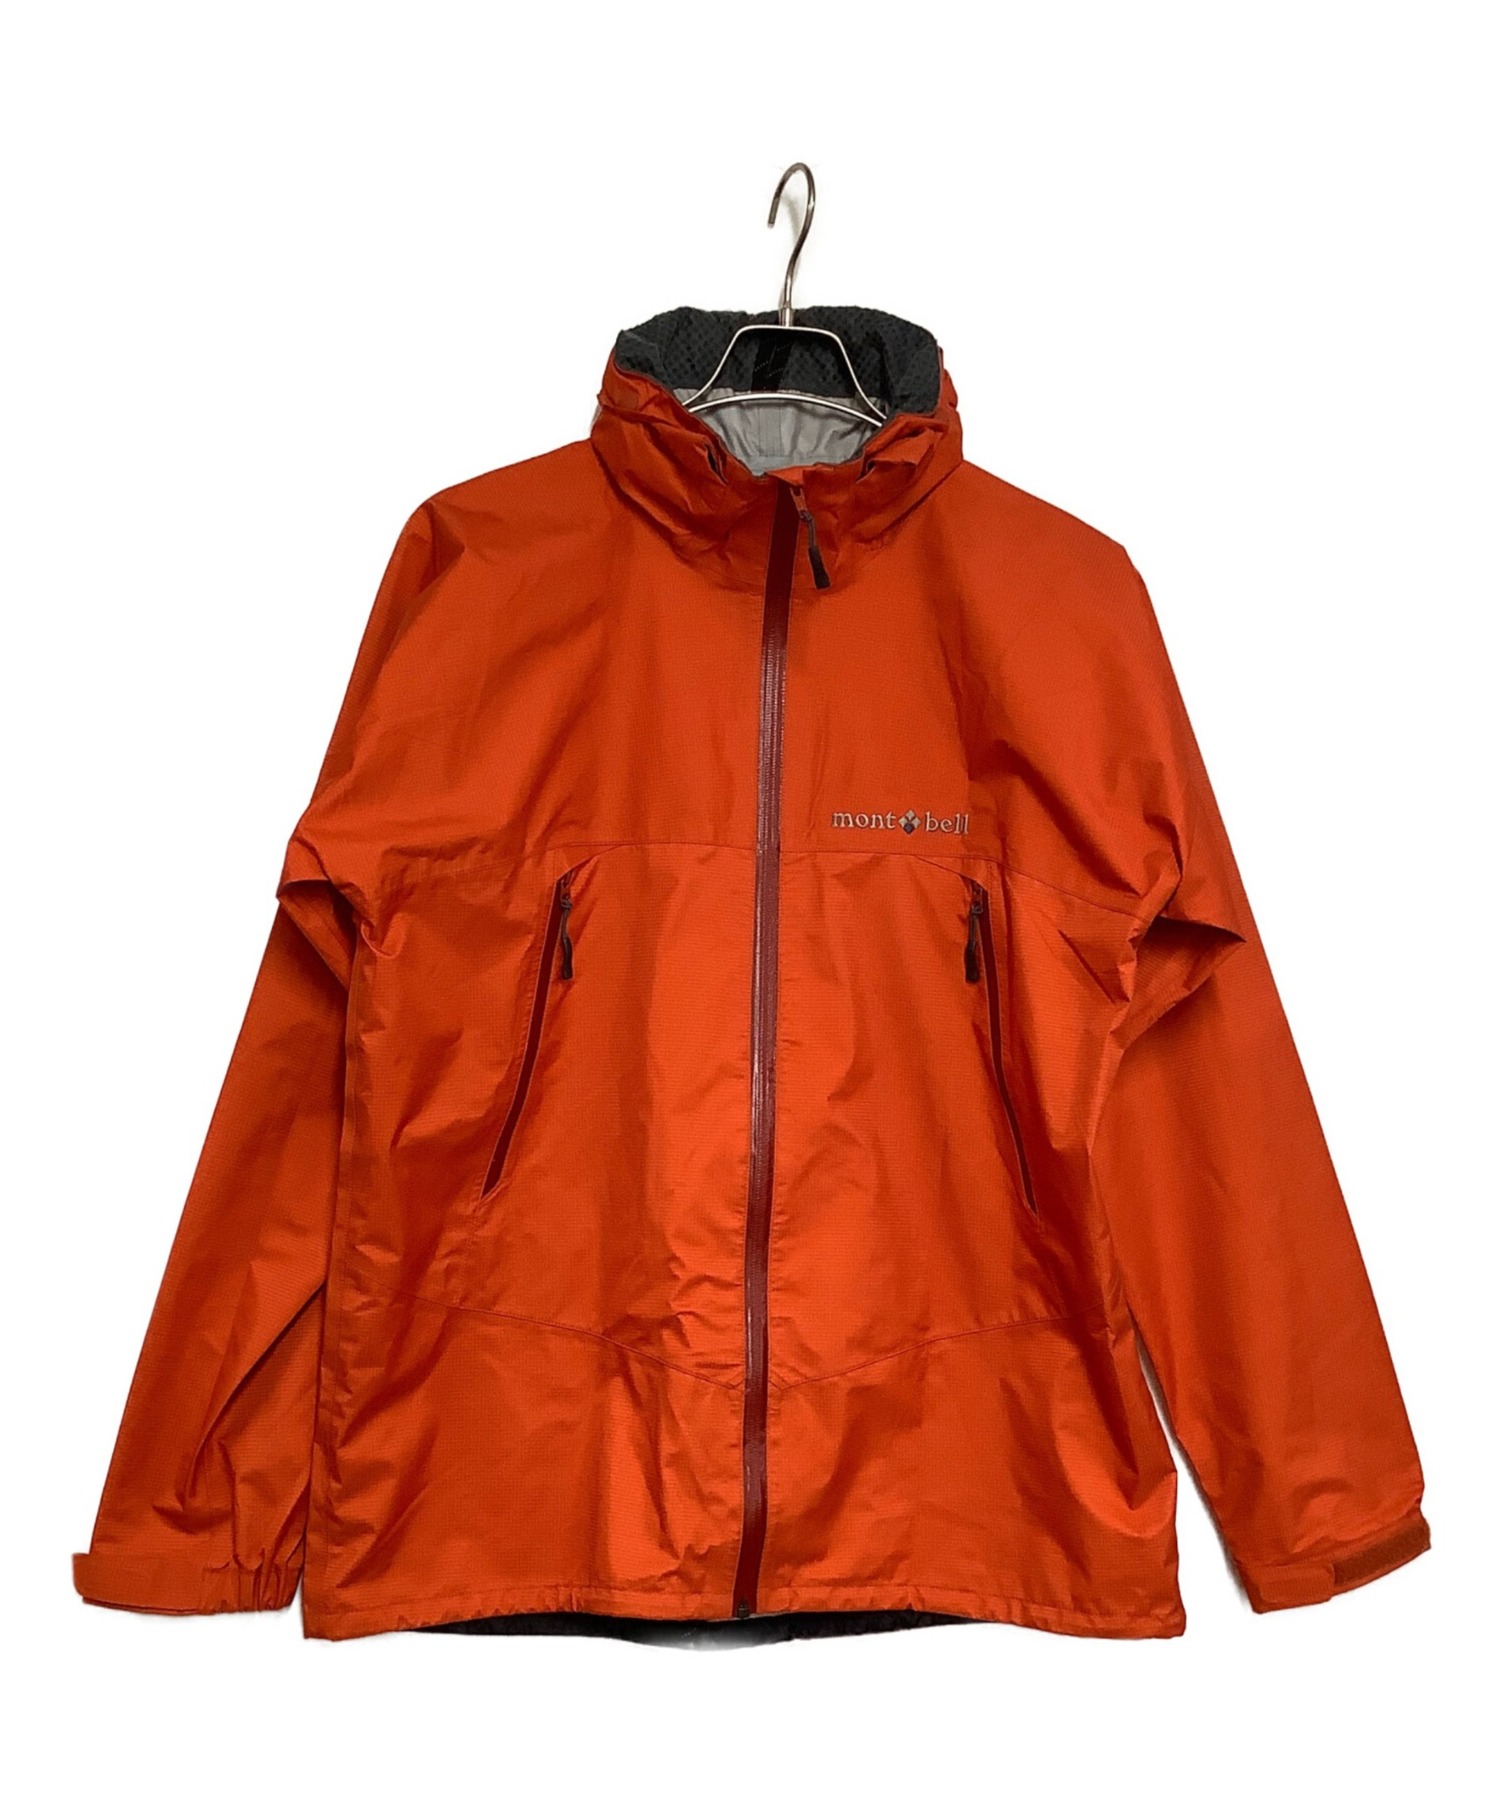 montbell GORE-TEX shell jacket Y2K80s